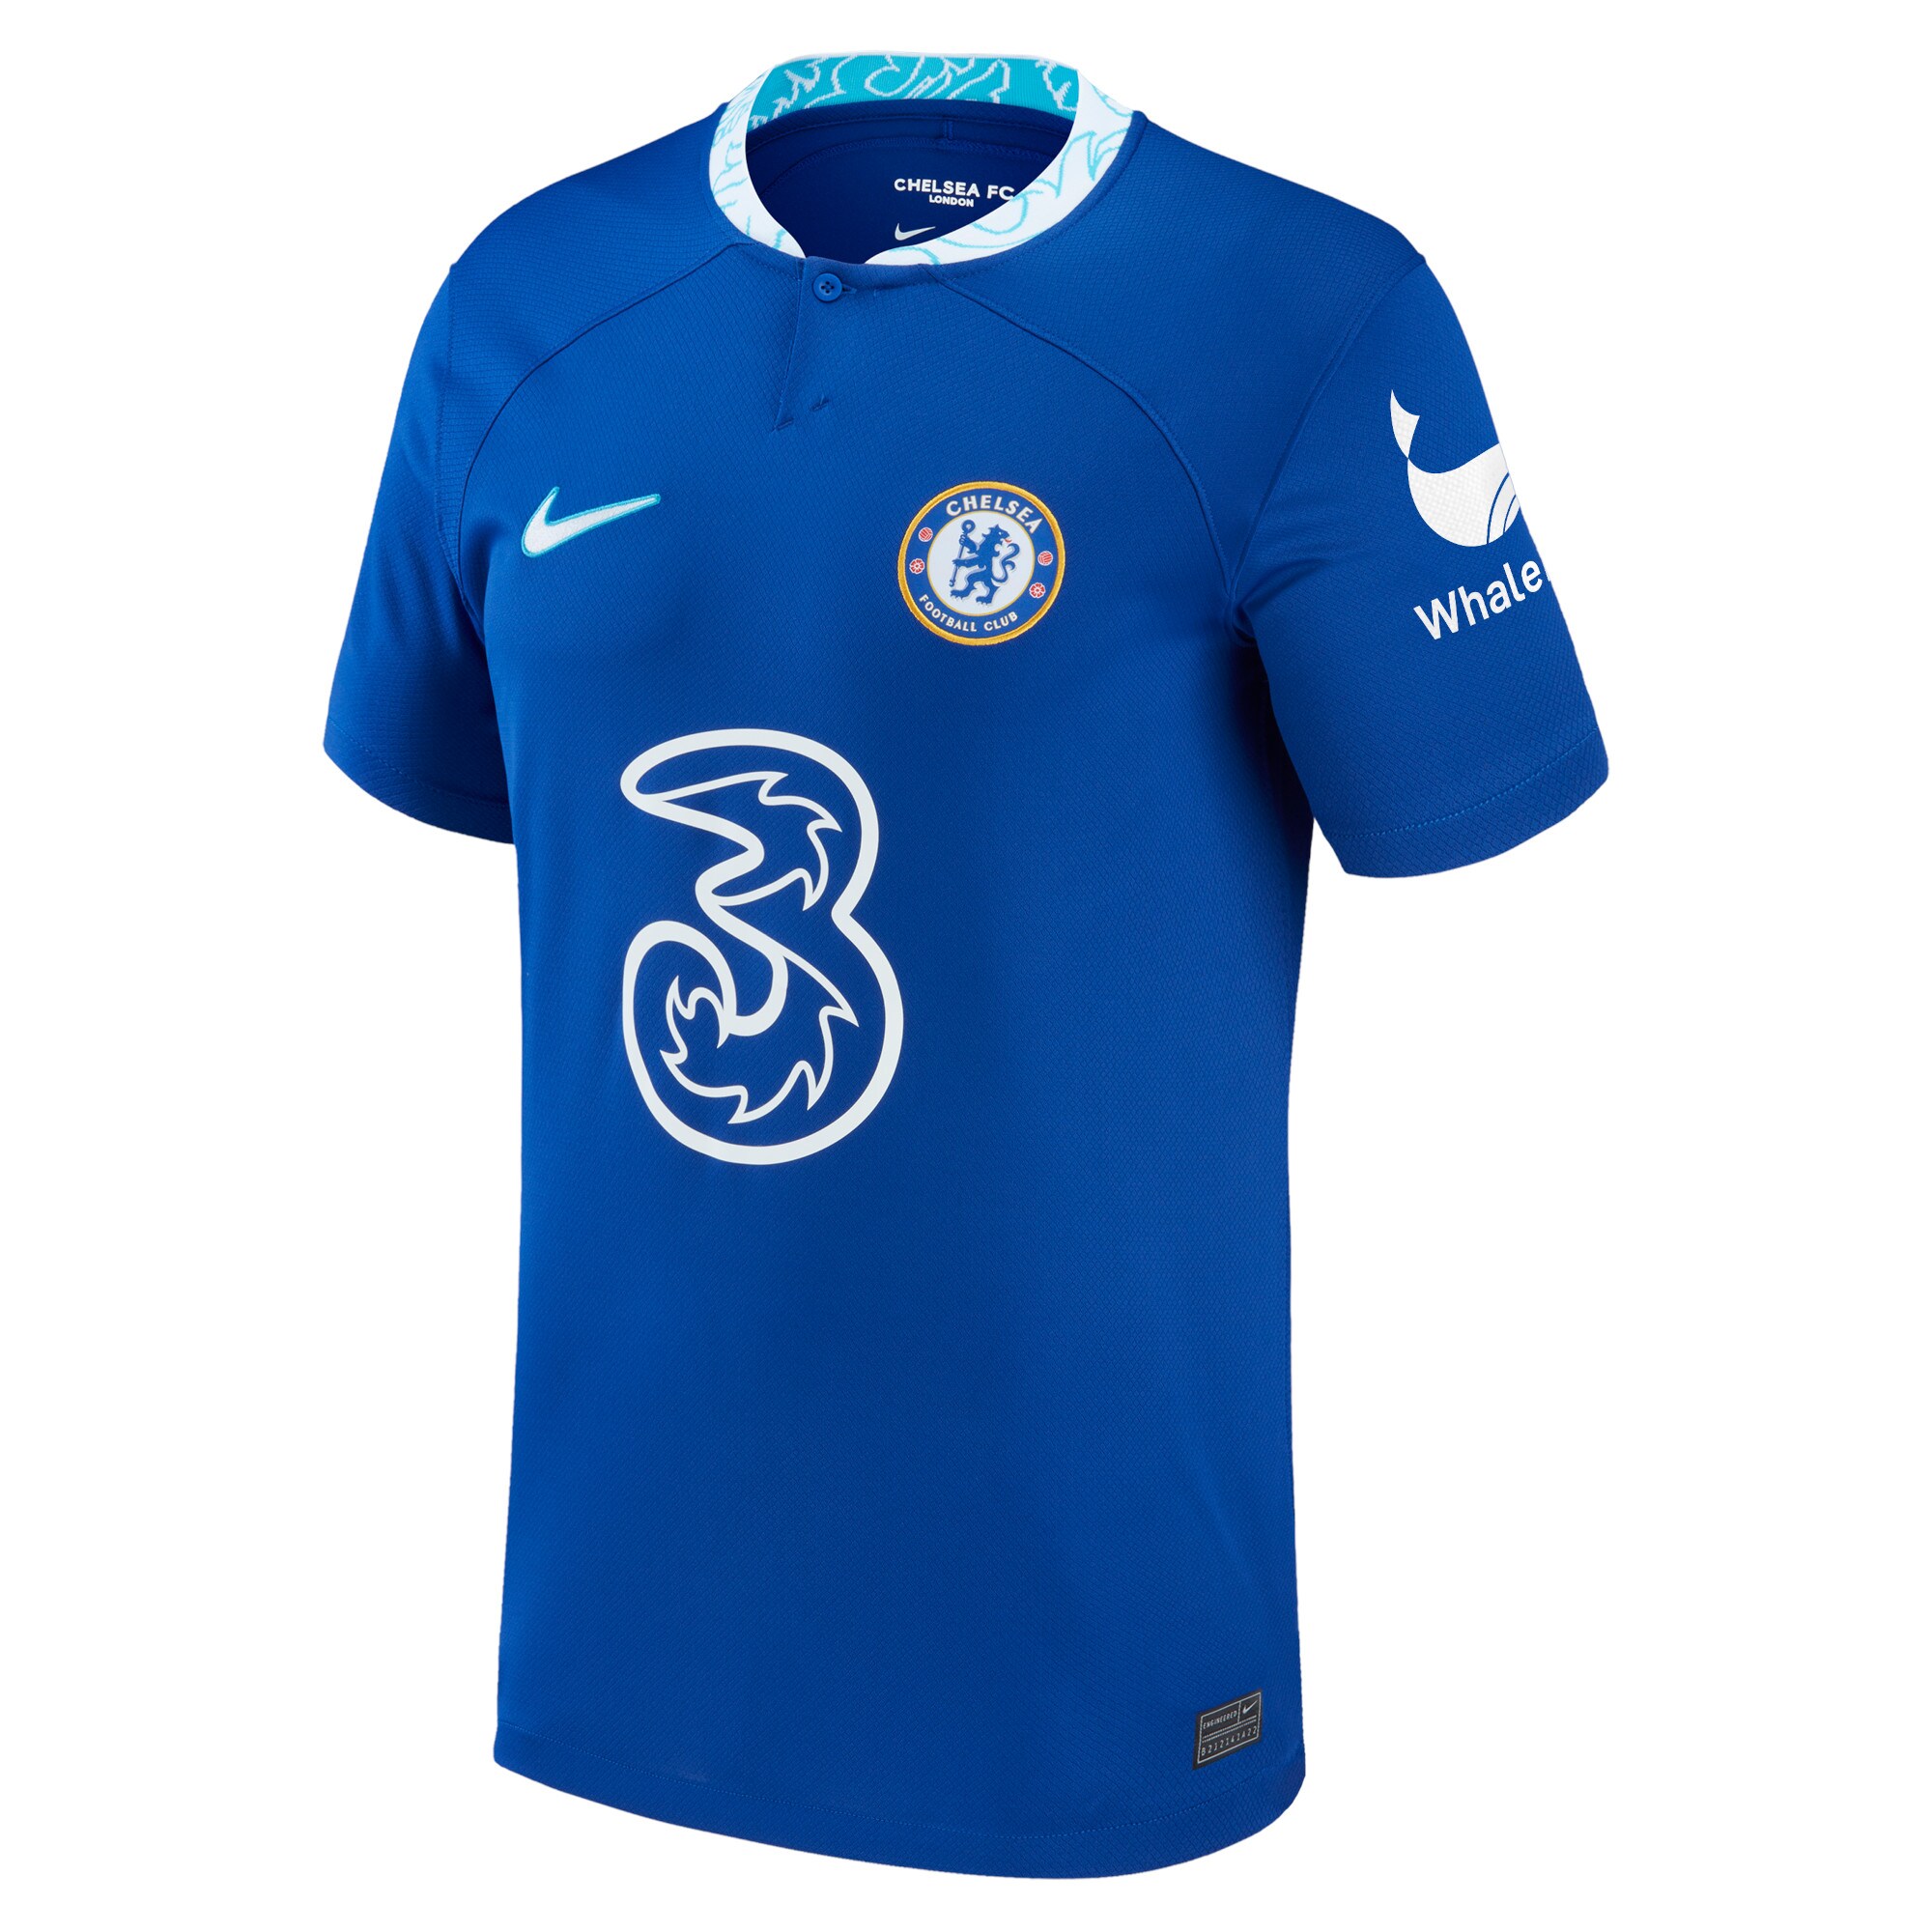 Chelsea Cup Home Stadium Shirt 2022-23 with Emerson 33 printing